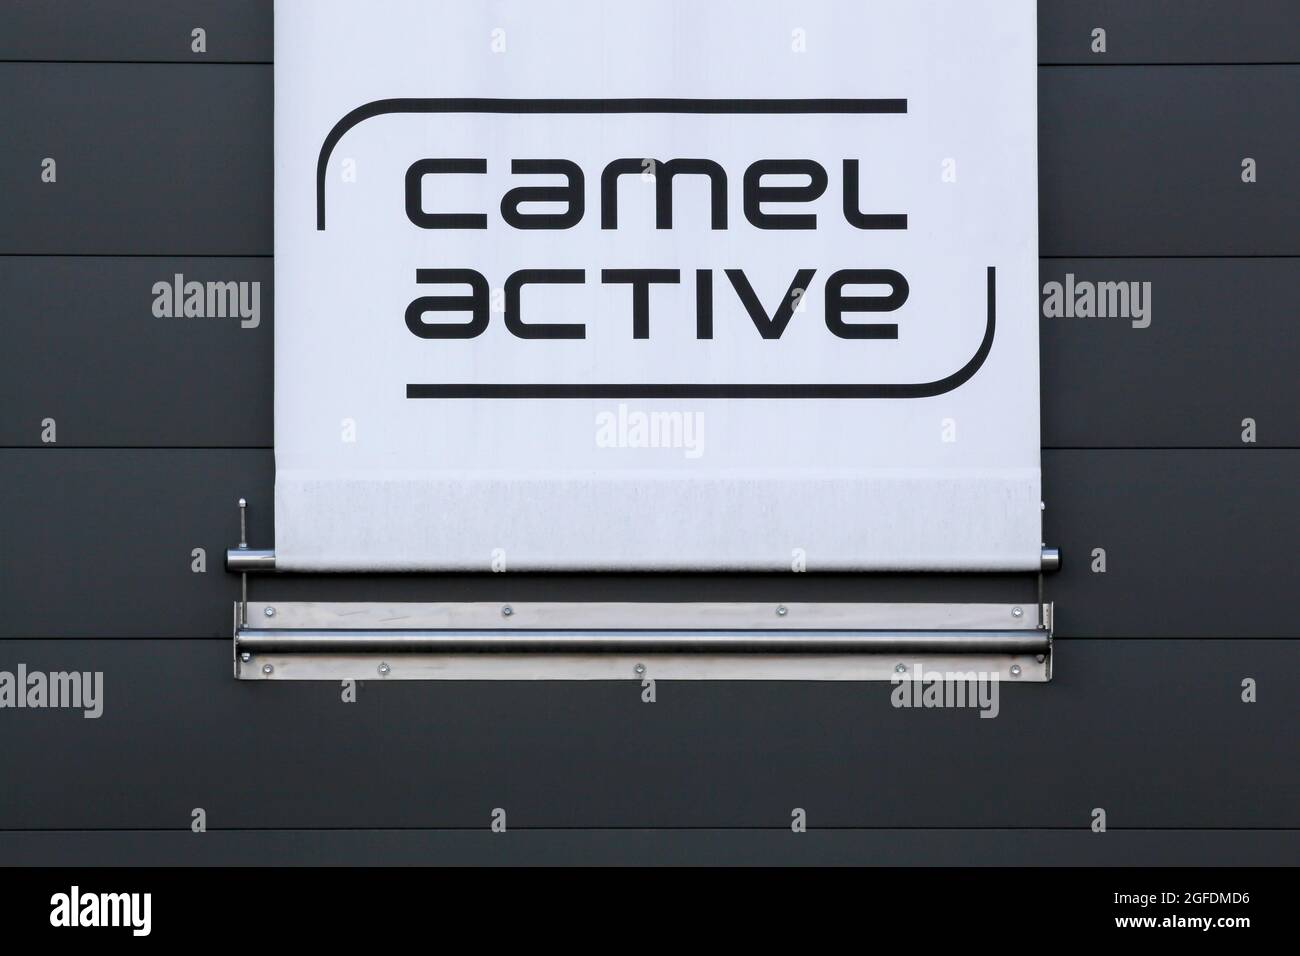 Villefranche, France - July 10, 2021: Camel active logo on a wall. Camel  active is an international lifestyle brand for men and women Stock Photo -  Alamy